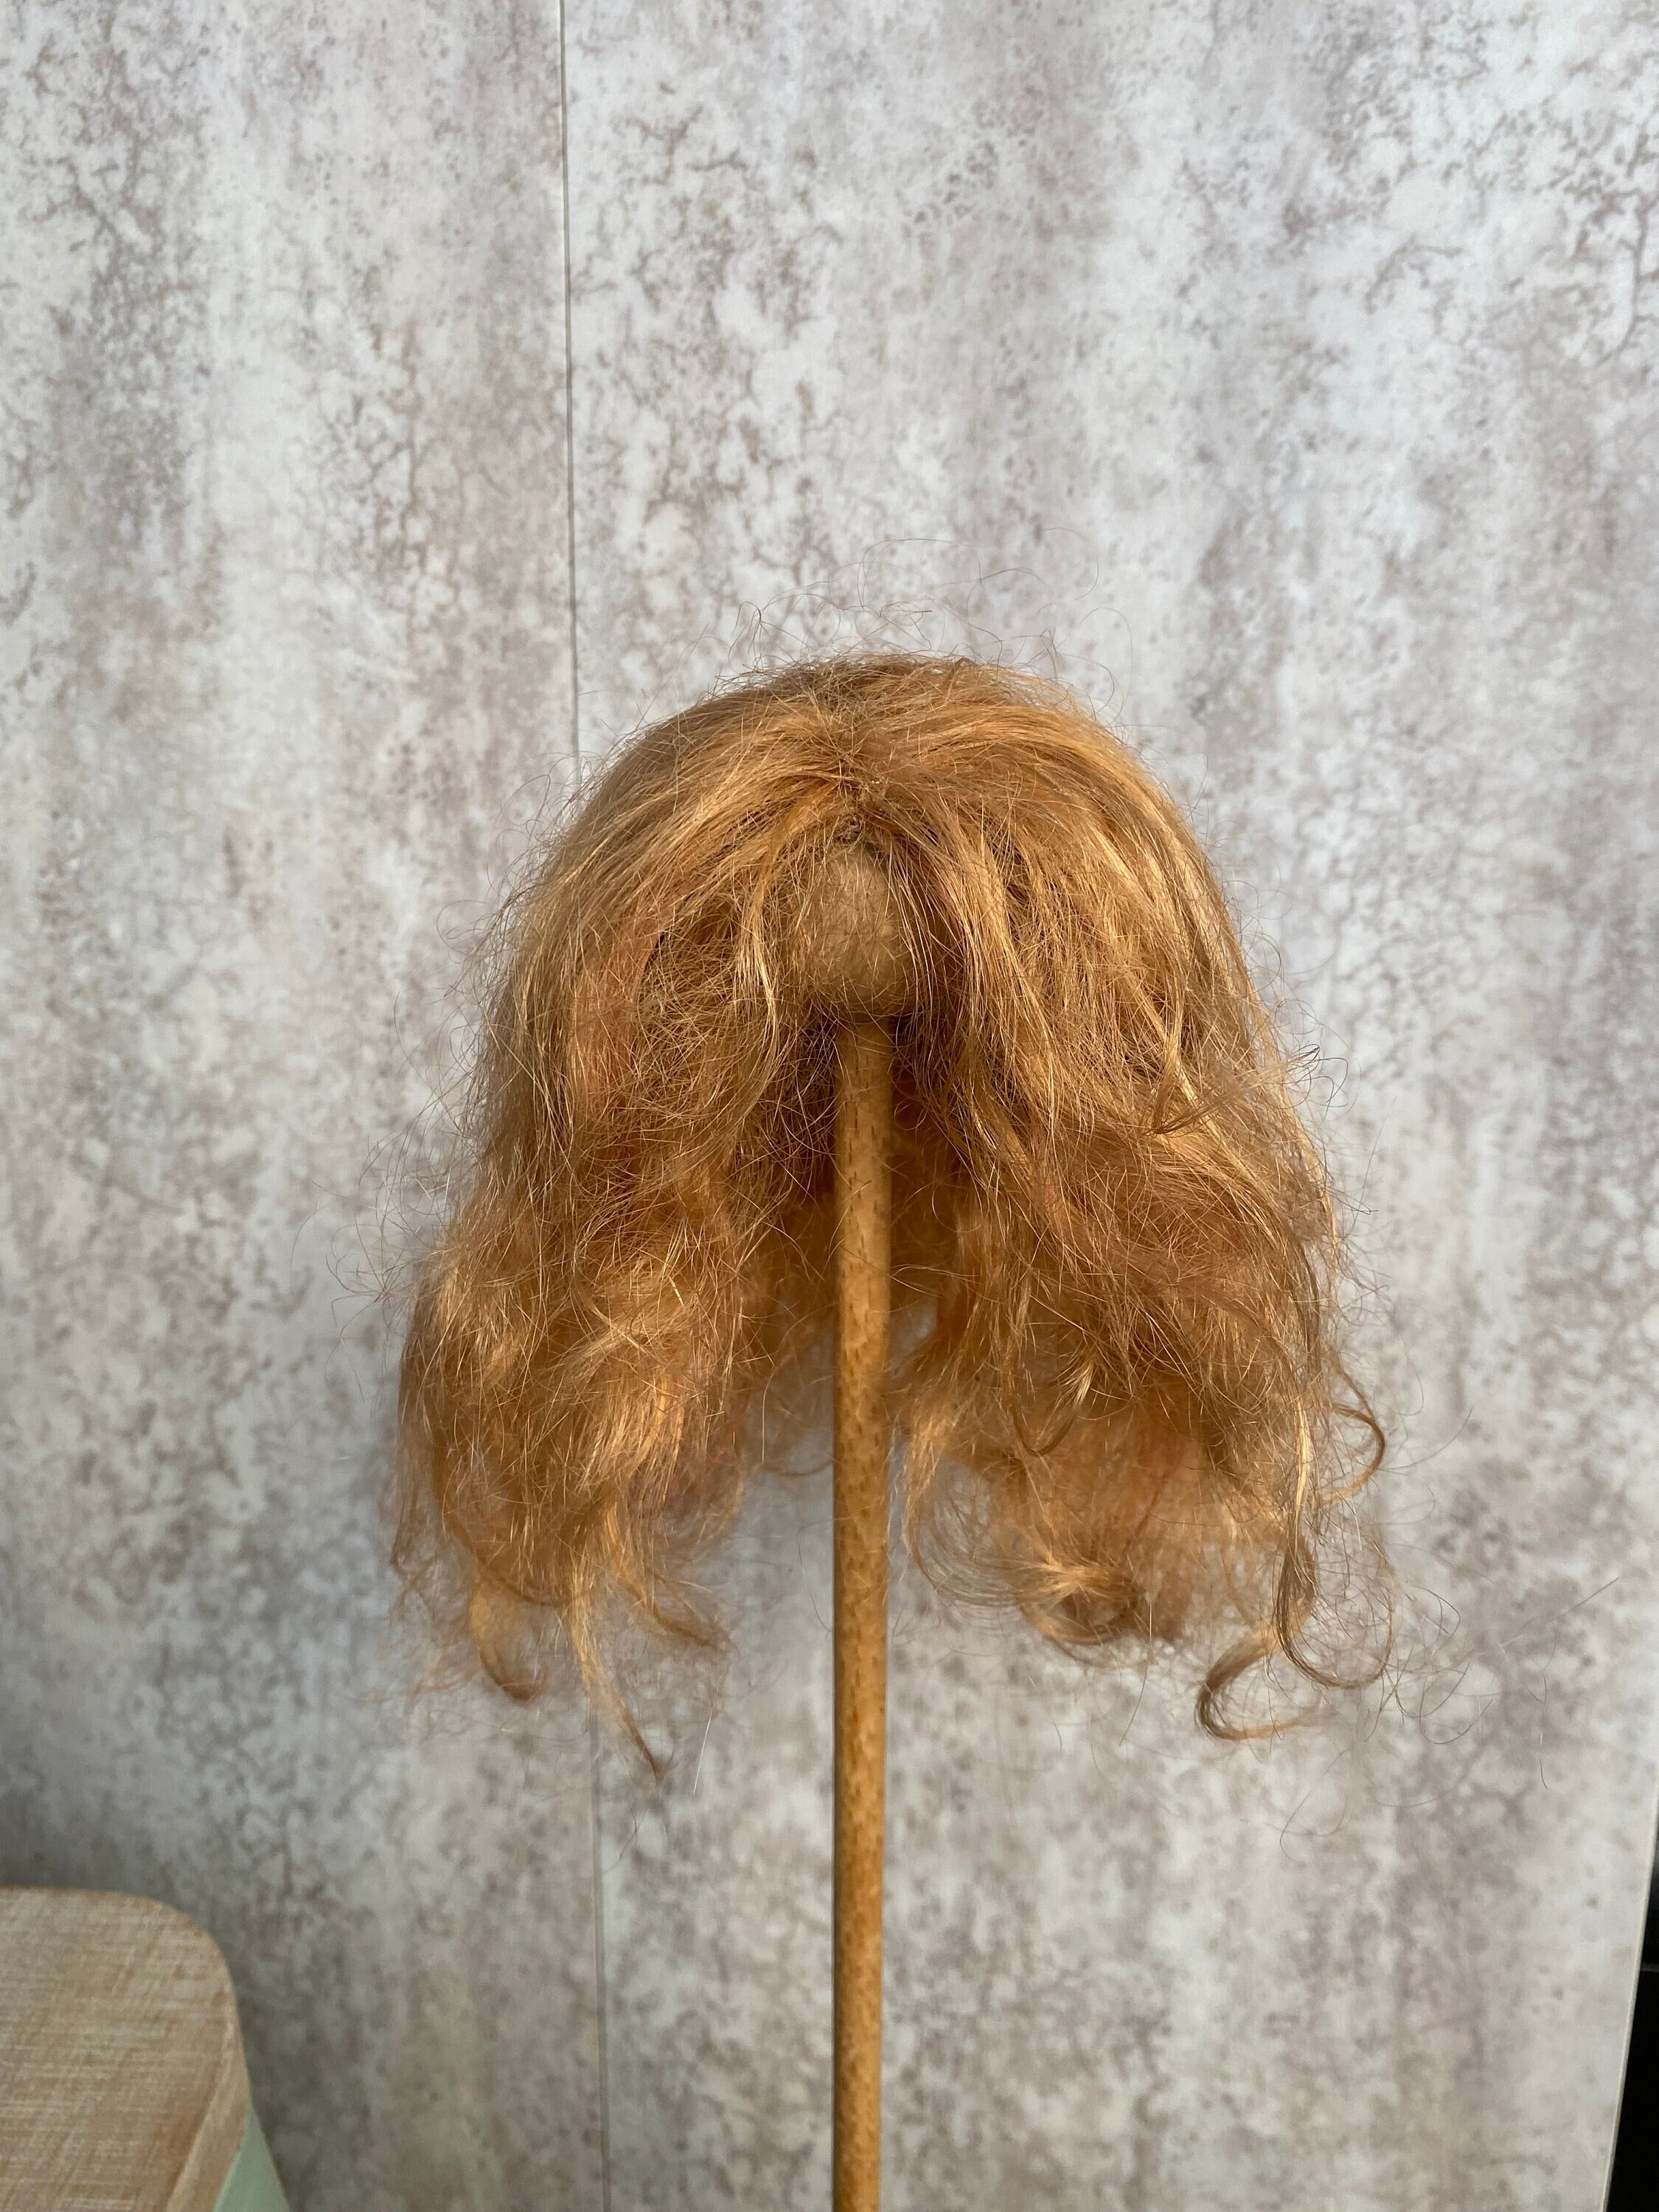 Wig Assist Size 6-7 Portable Wig Stand for Doll, Wig Styling Stand 